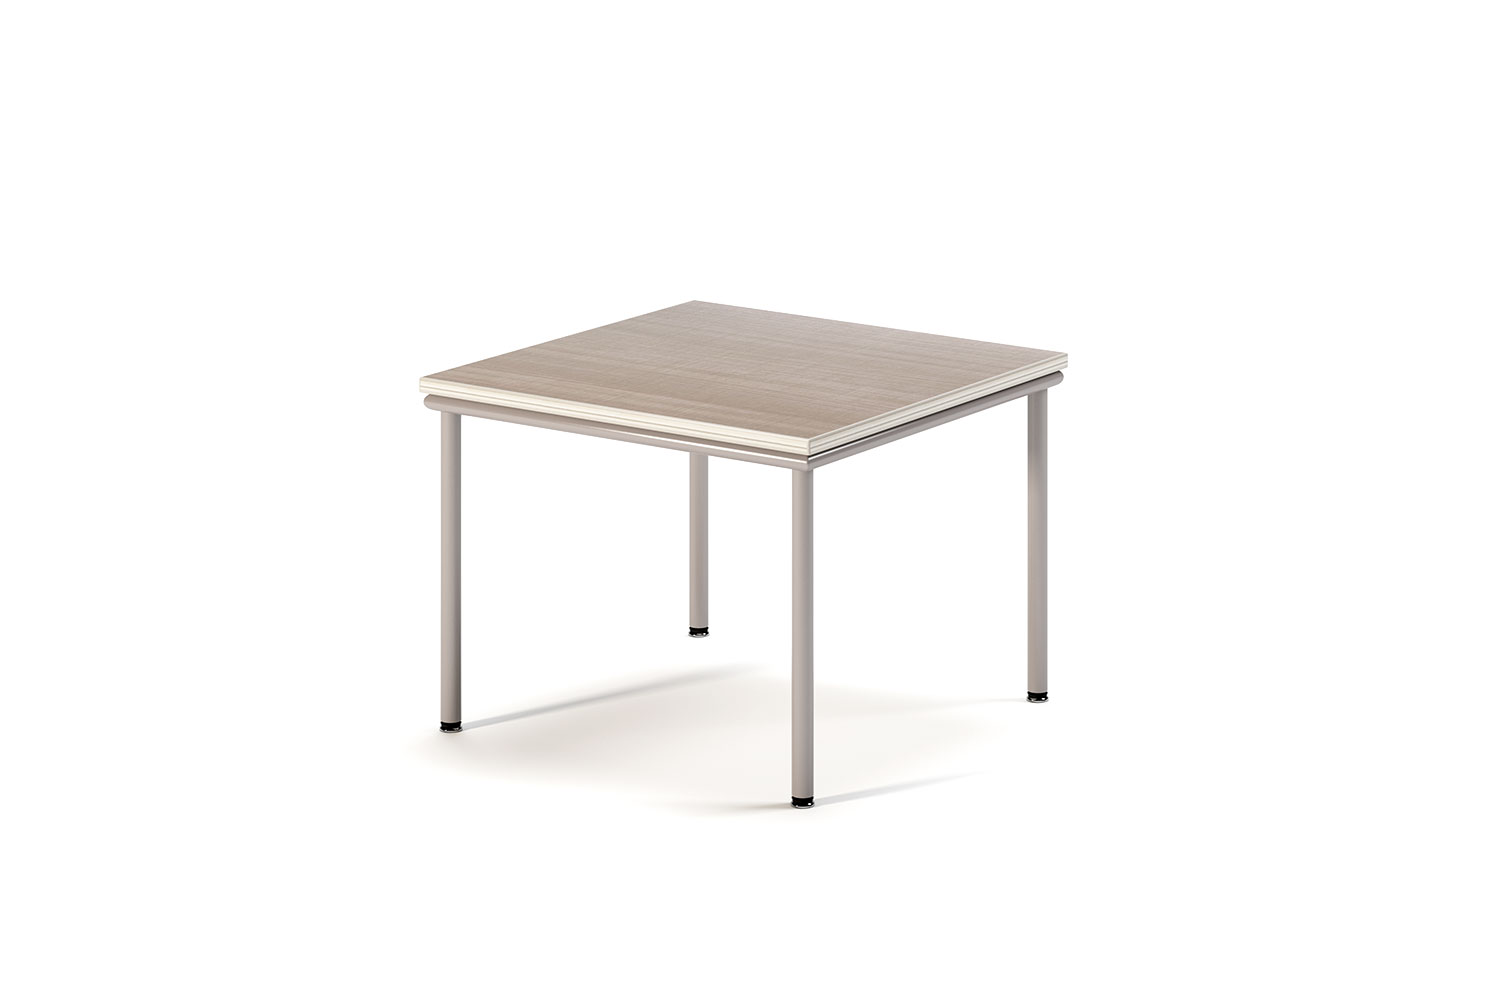 Cody 18 inch Square Occasional Table